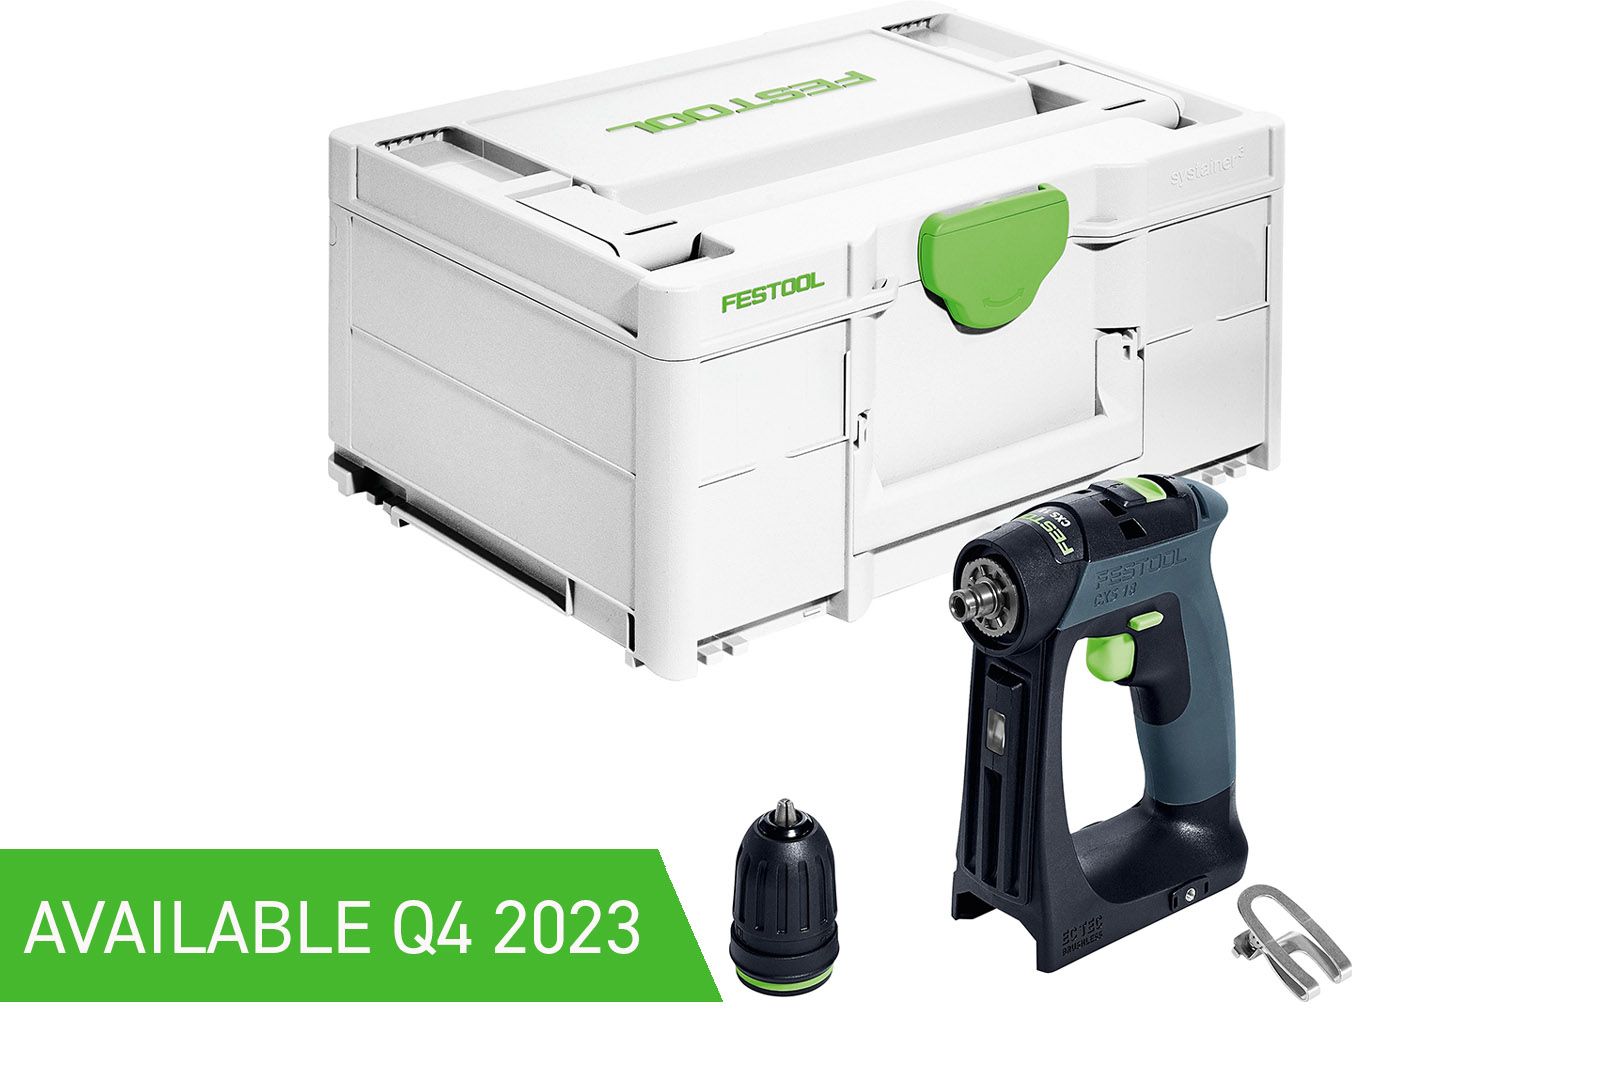 CXS 18V Cordless Compact 2 Speed Drill Basic Bare (Tool Only) 576882 by Festool